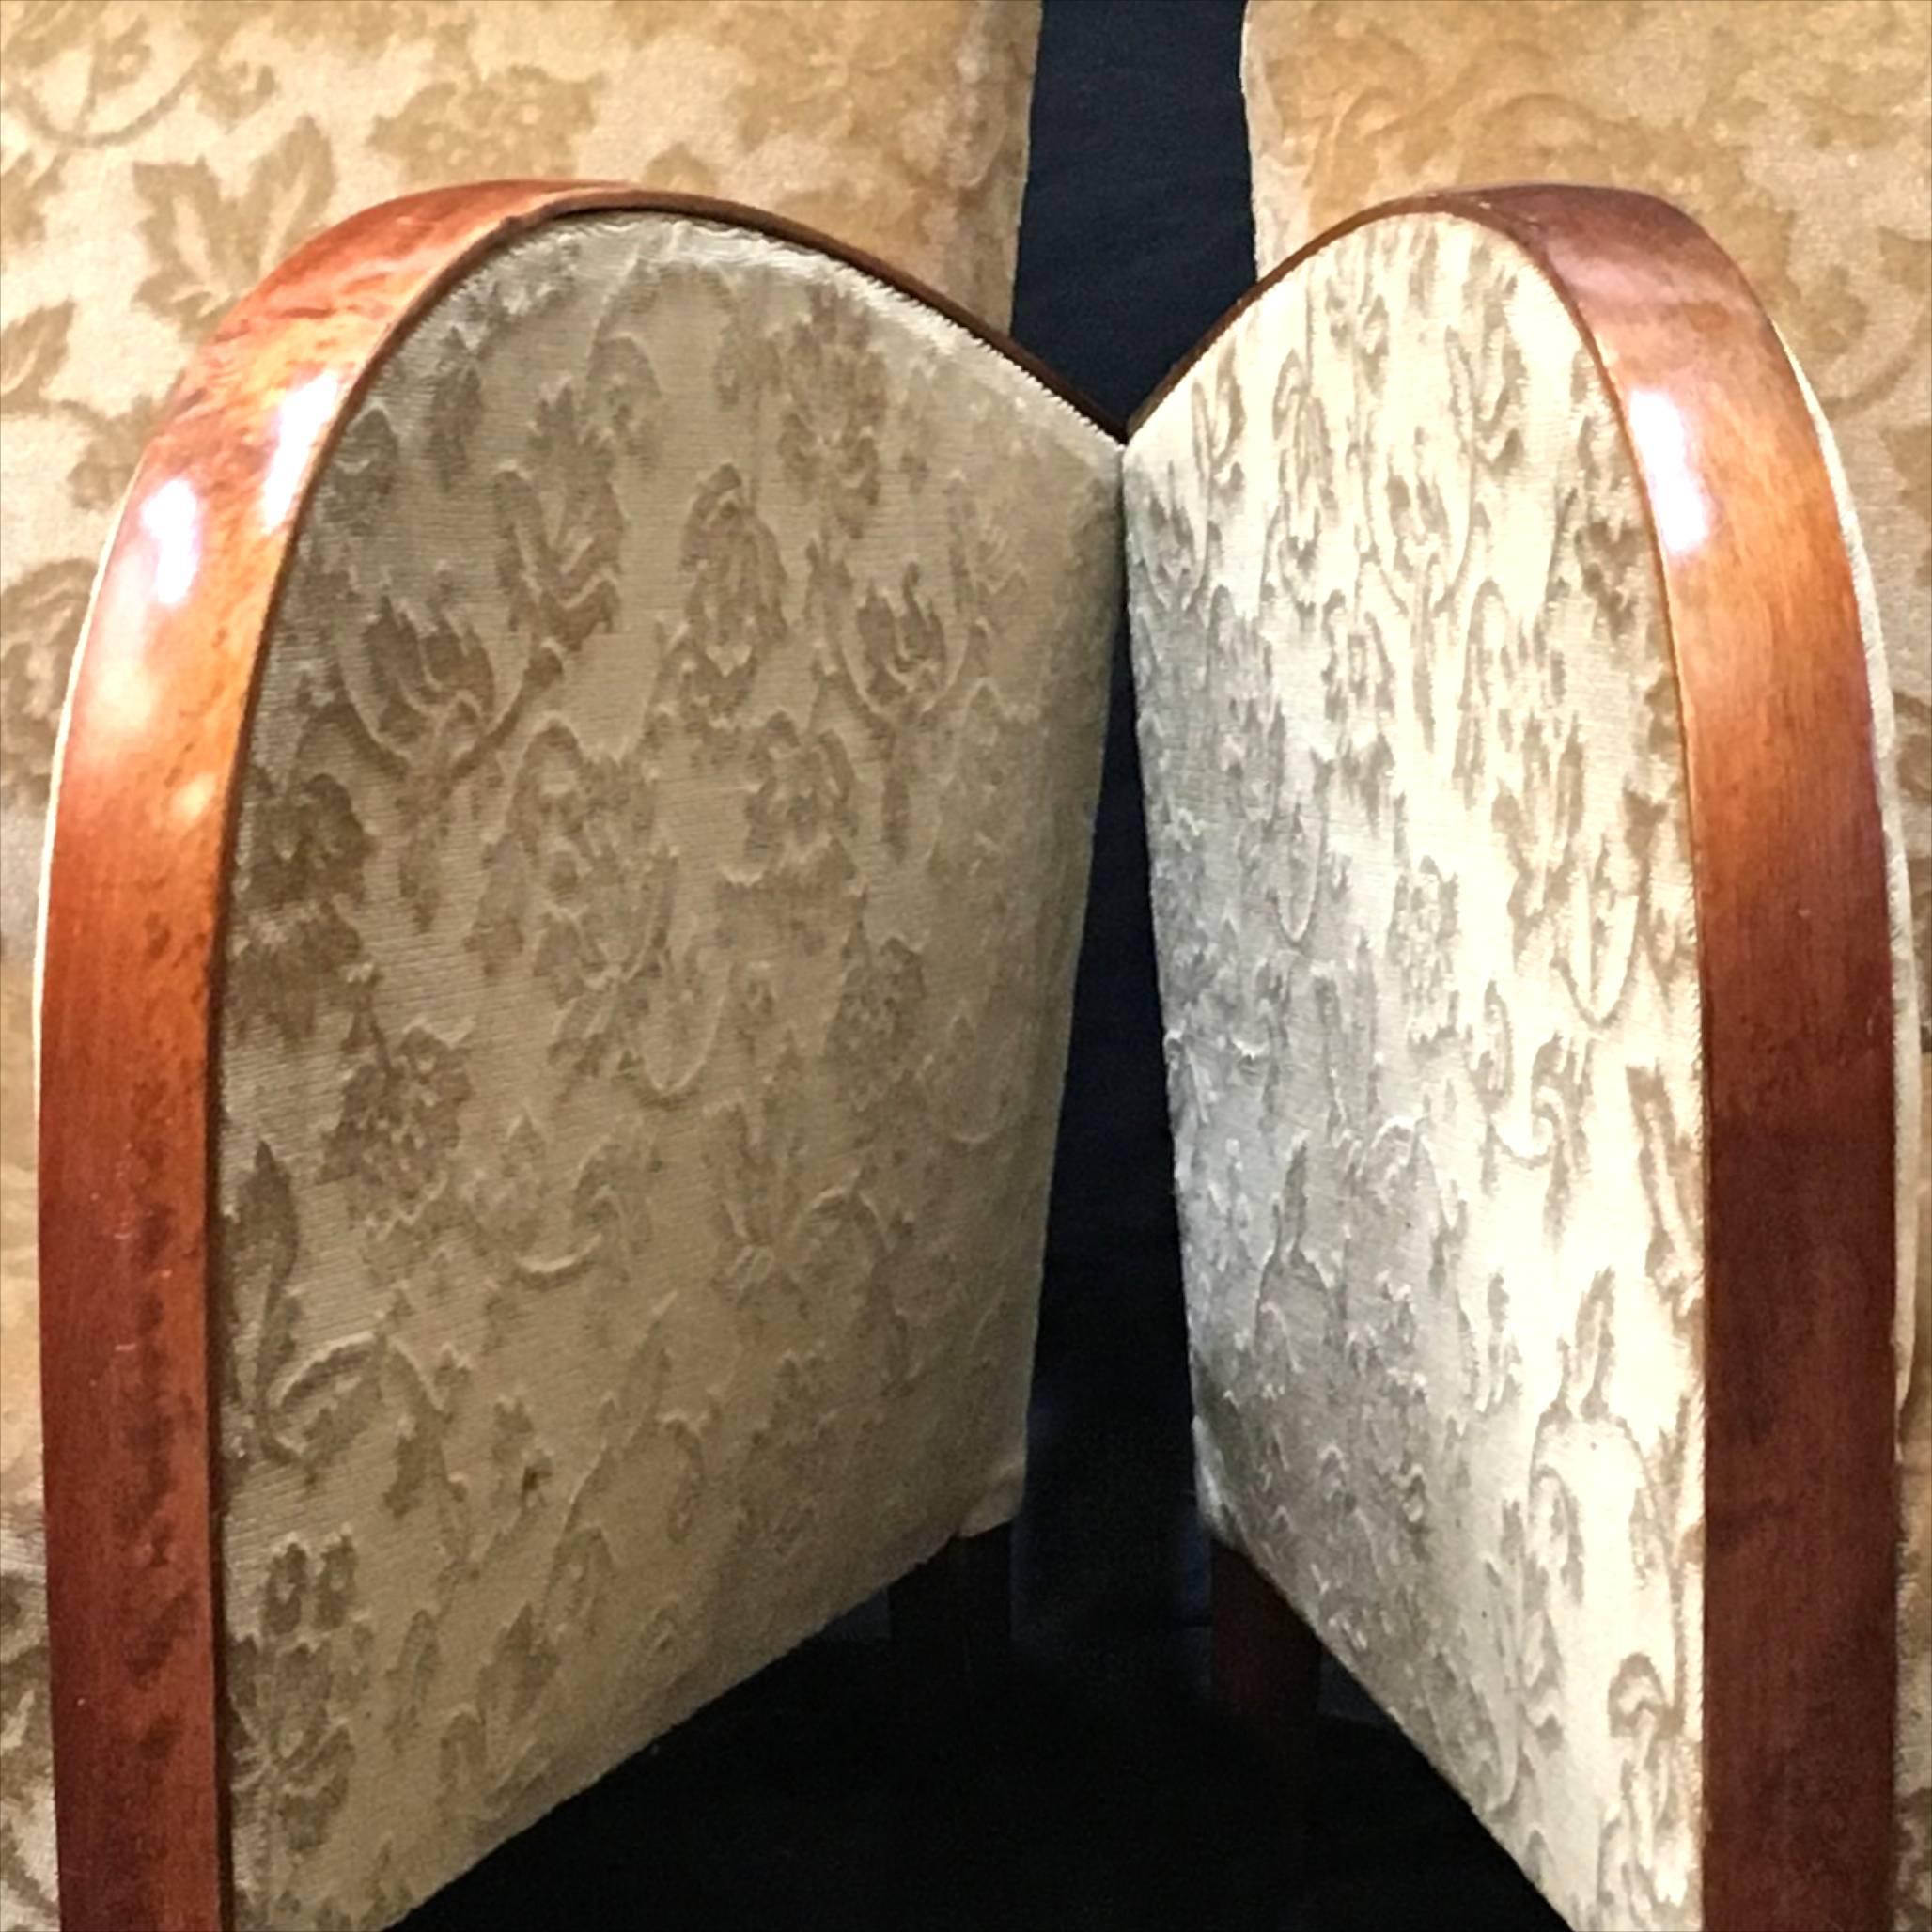 Swedish Art Deco armchairs from the Art Deco period with golden birch bentwood arms in a rich honey color French polish finish. They are structurally sound.

The extra deep fully sprung seats on these armchairs make for a great sitting experience